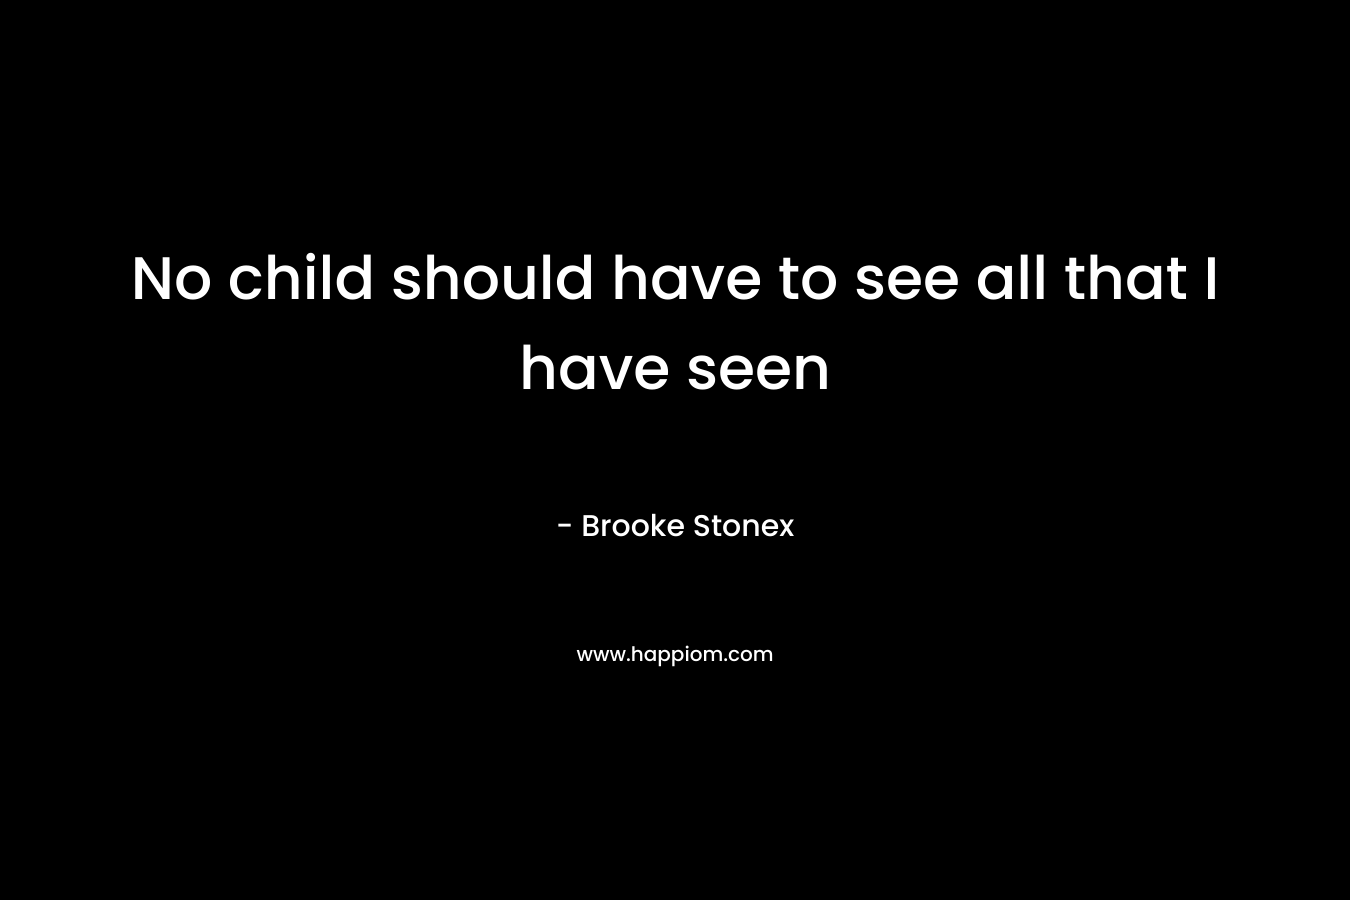 No child should have to see all that I have seen – Brooke Stonex